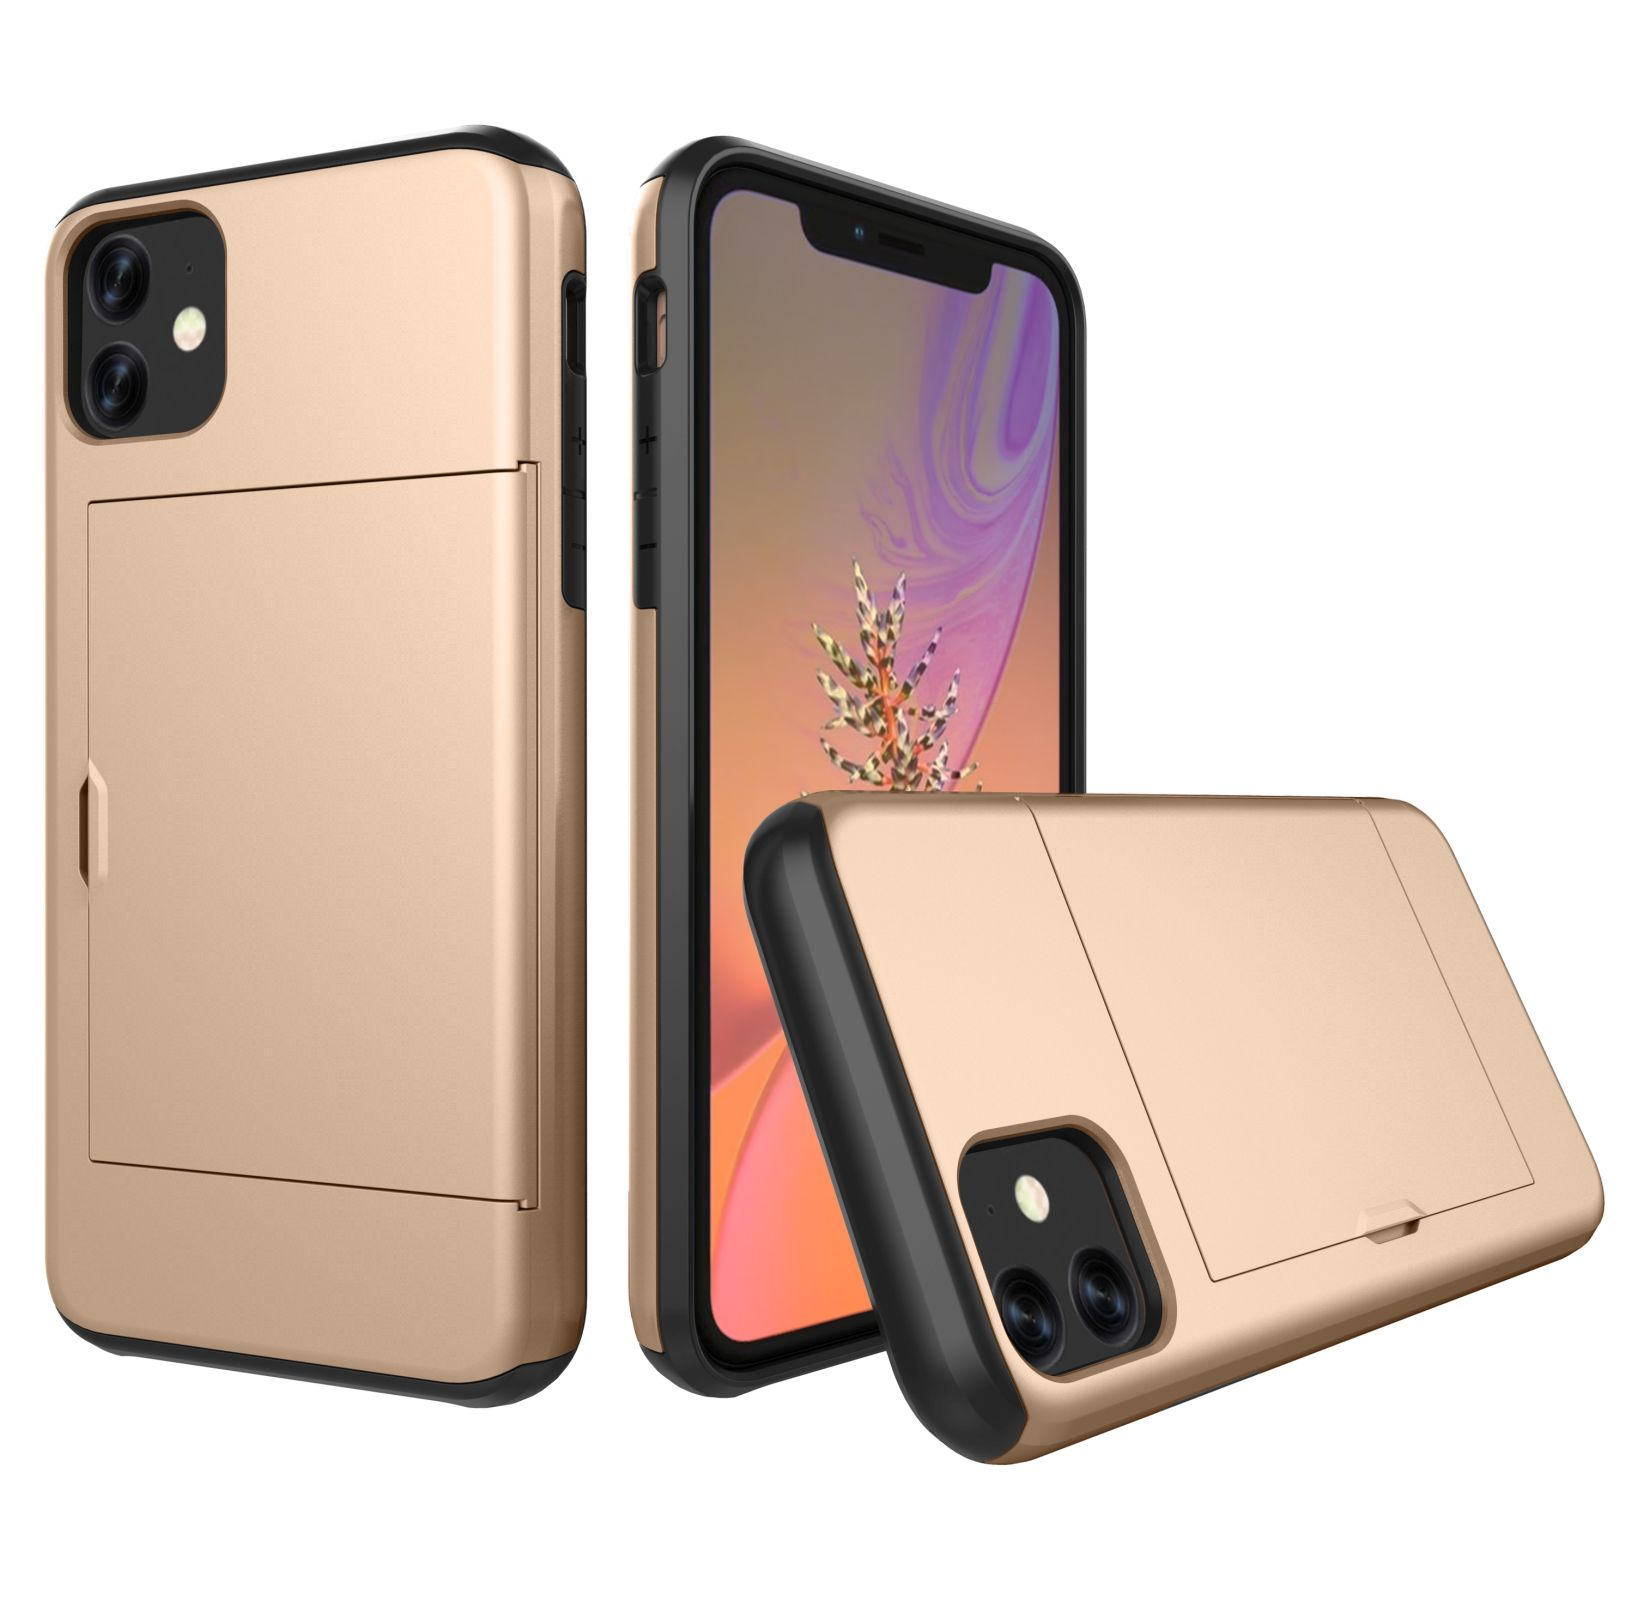 Backcover, Apple, gold 6.5 2019 iPhone Pro Max LOBWERK Hülle, 11 Zoll,